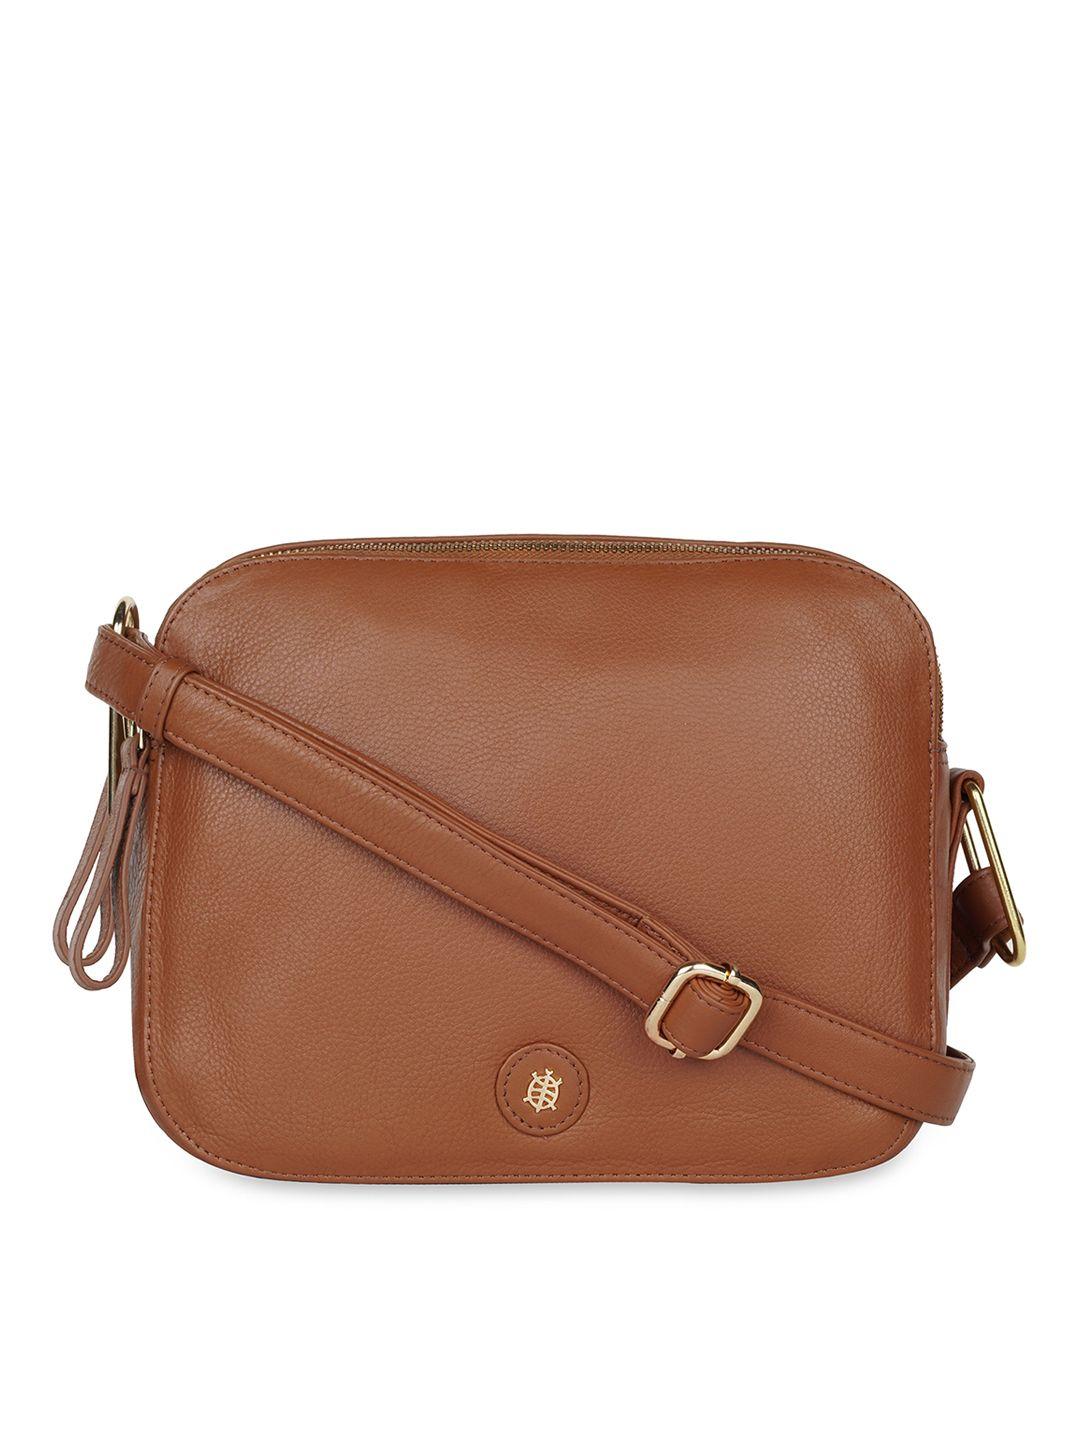 tortoise leather structured sling bag with tasselled